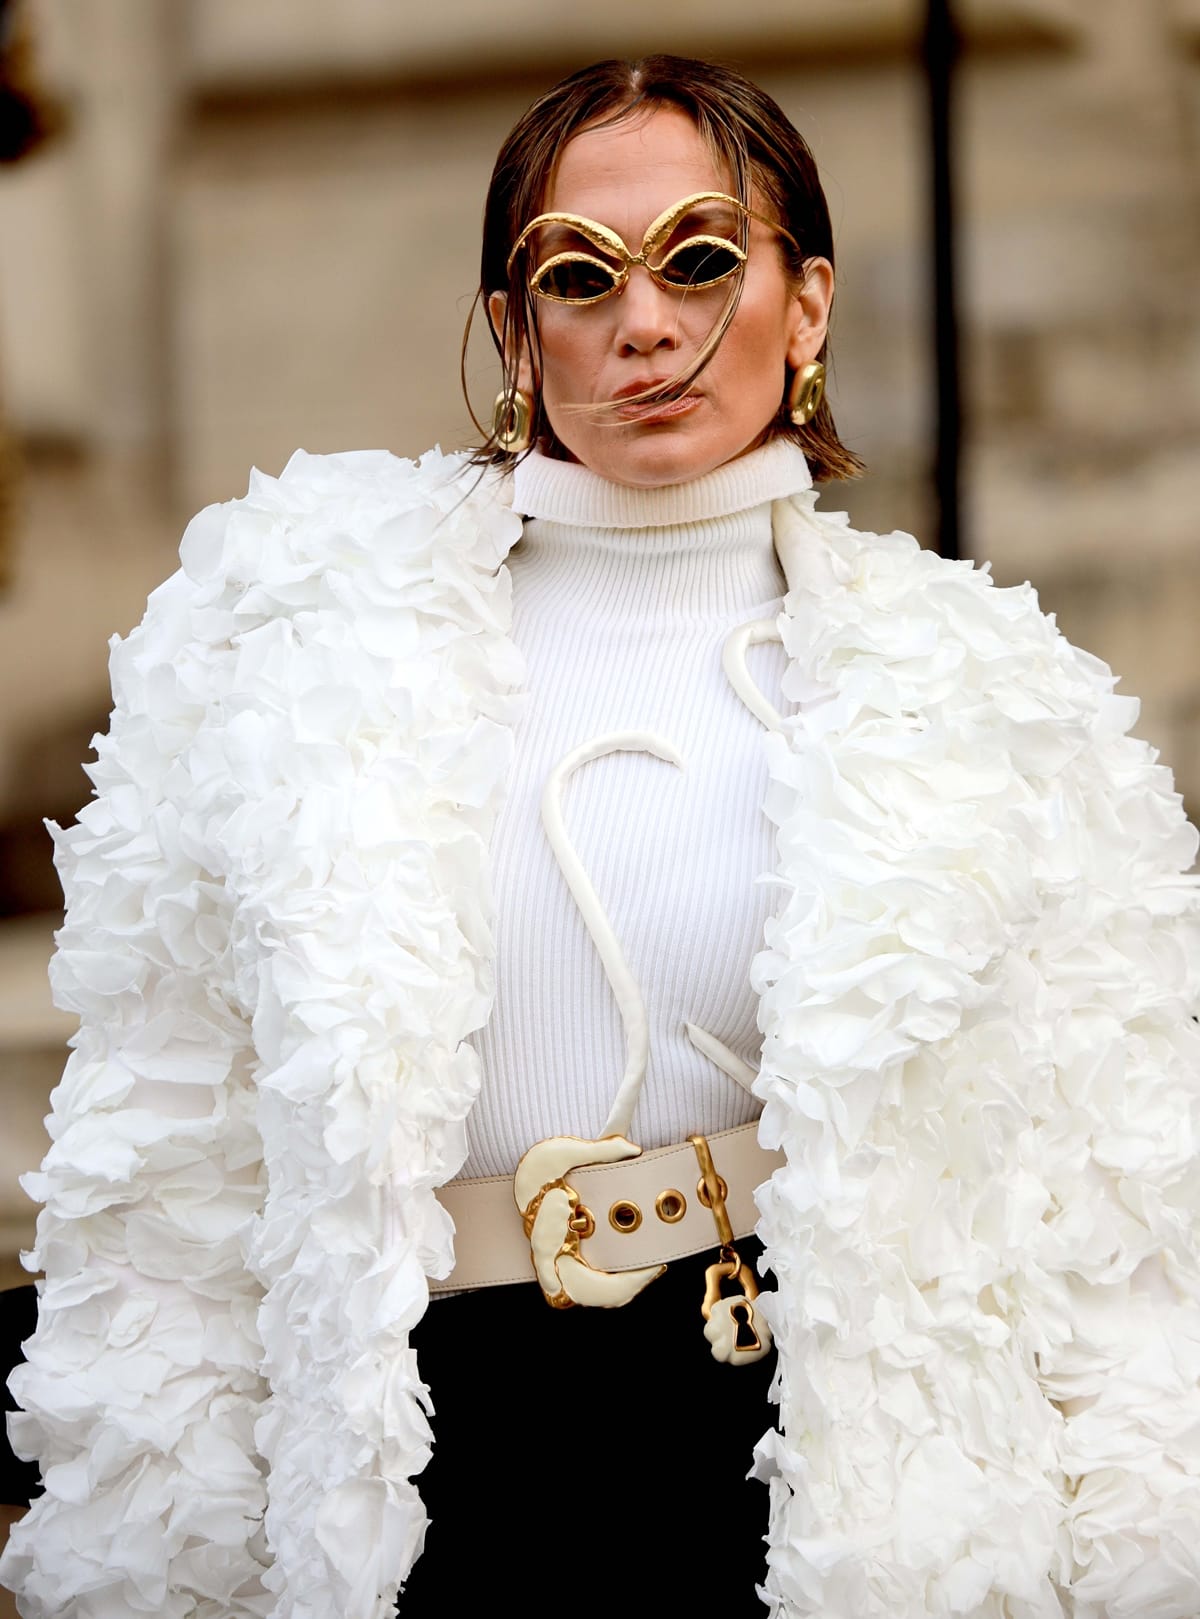 Accentuating her haute couture look, Jennifer Lopez sports quirky metal gold sunglasses with almond-shaped lenses and thick frames